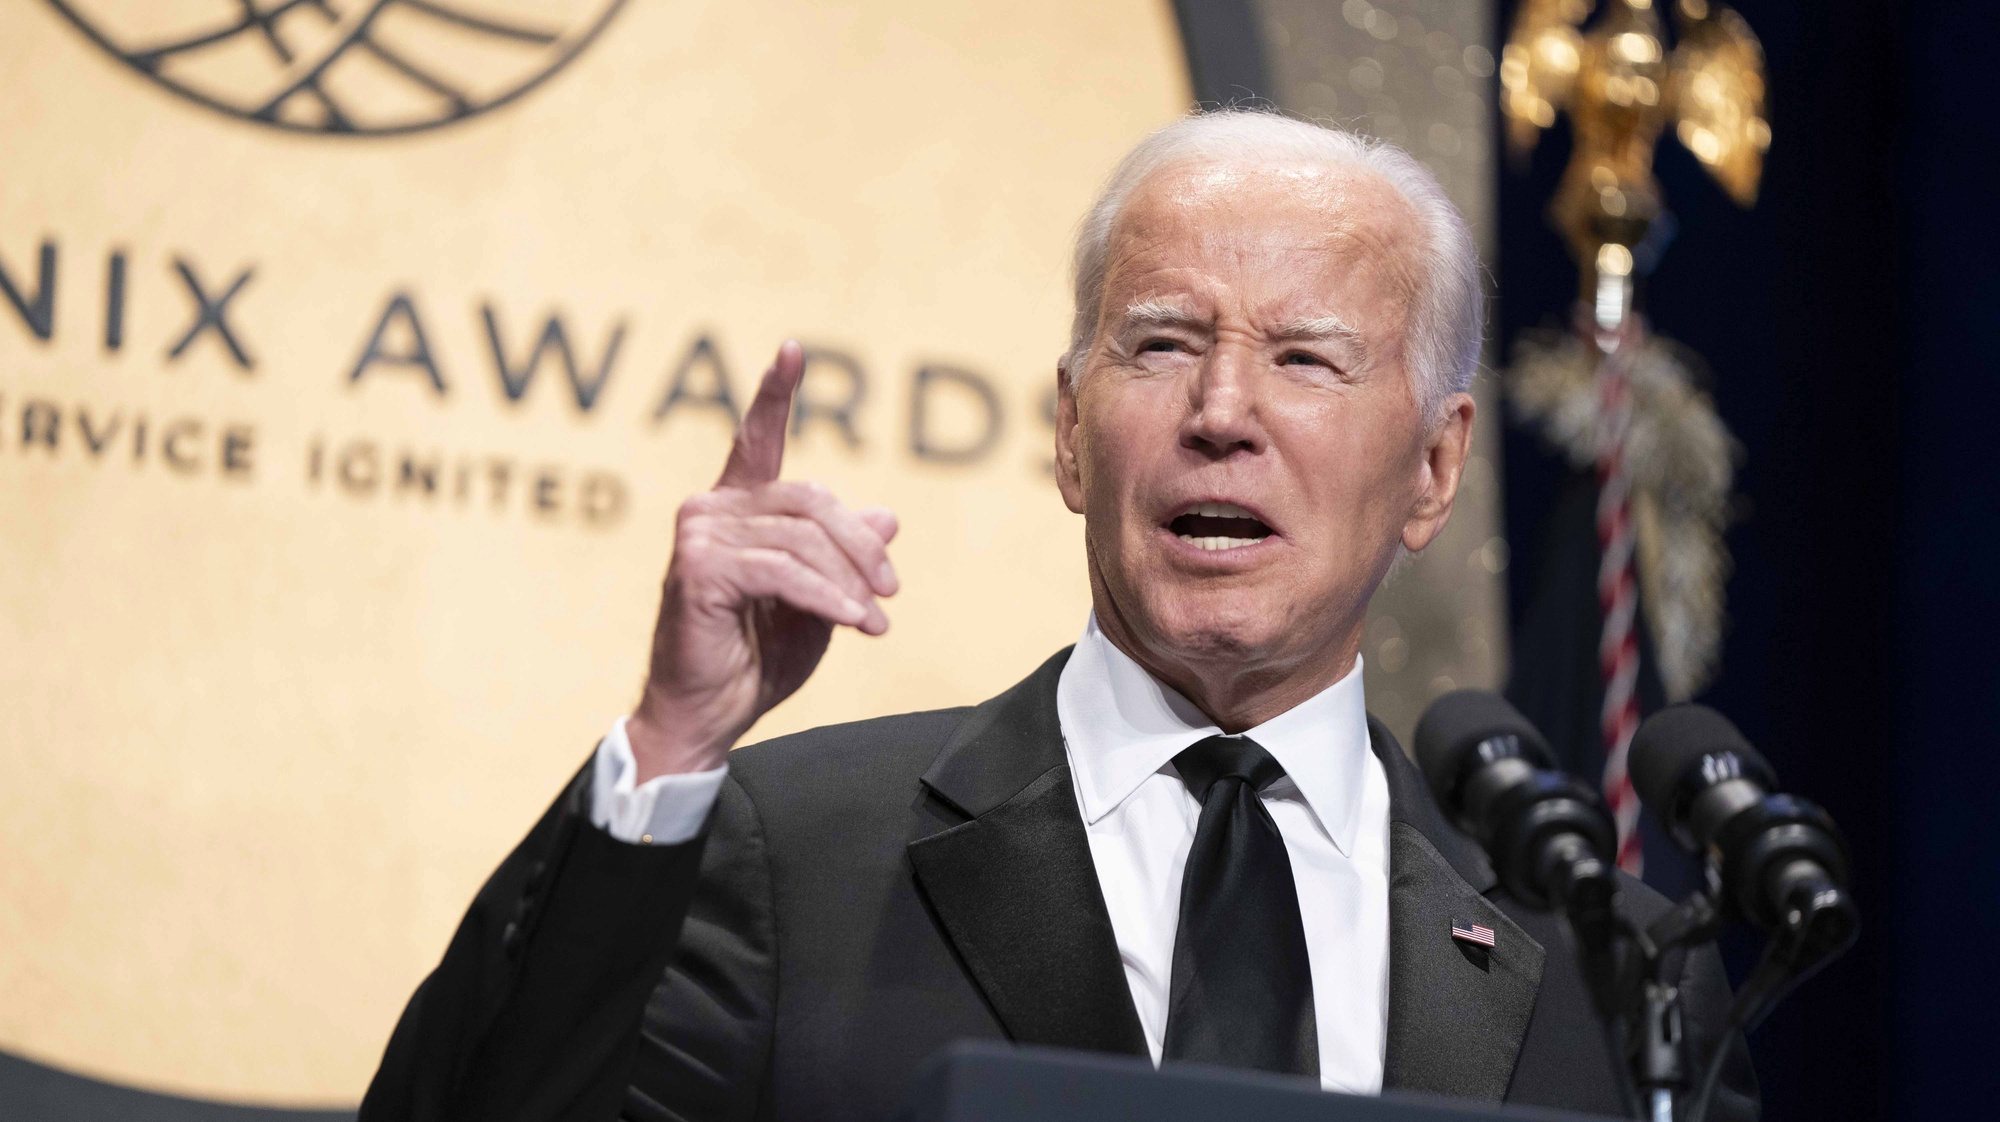 epa10879739 US President Joe Biden speaks during the 2023 Phoenix Awards Dinner at the Washington Convention Center in Washington, DC, USA, 23 September 2023. The dinner, hosted by the Congressional Black Caucus, recognizes individuals who have impacted the Black community.  EPA/BONNIE CASH / POOL